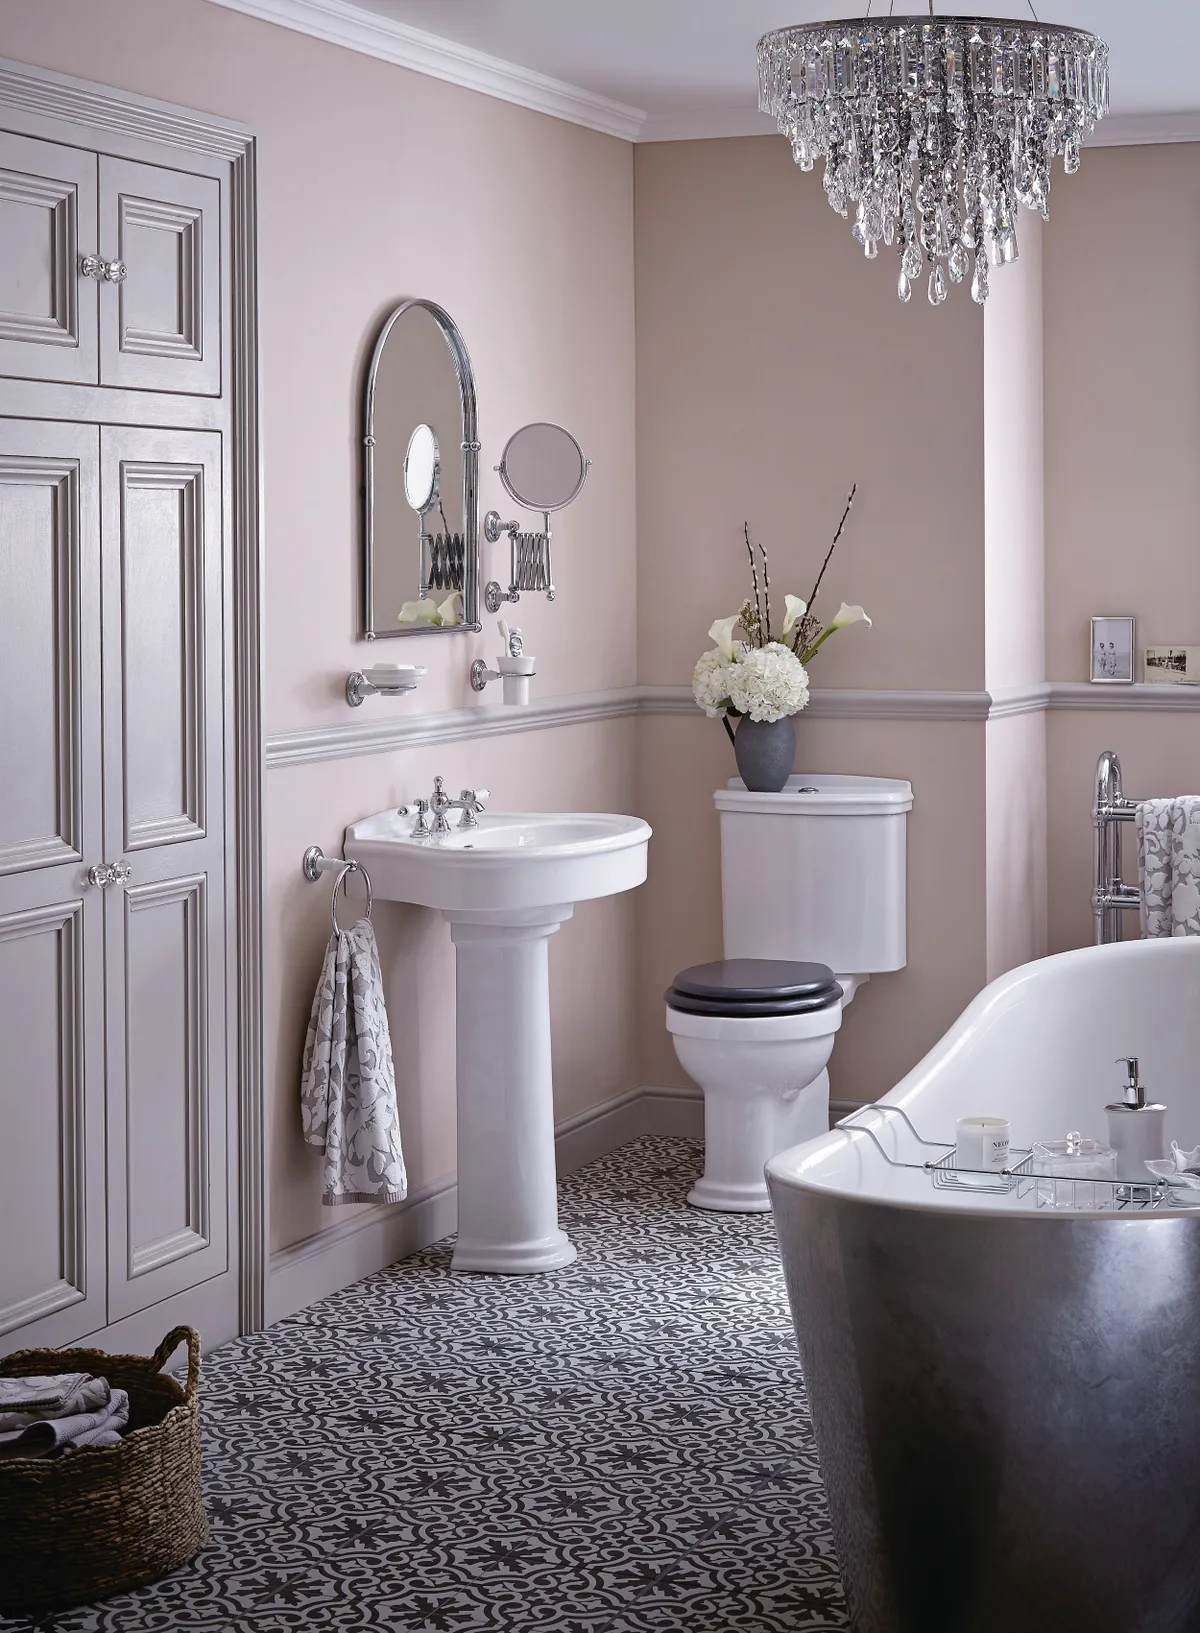 A blush pink bathroom with patterned tiles and a glass chandelier